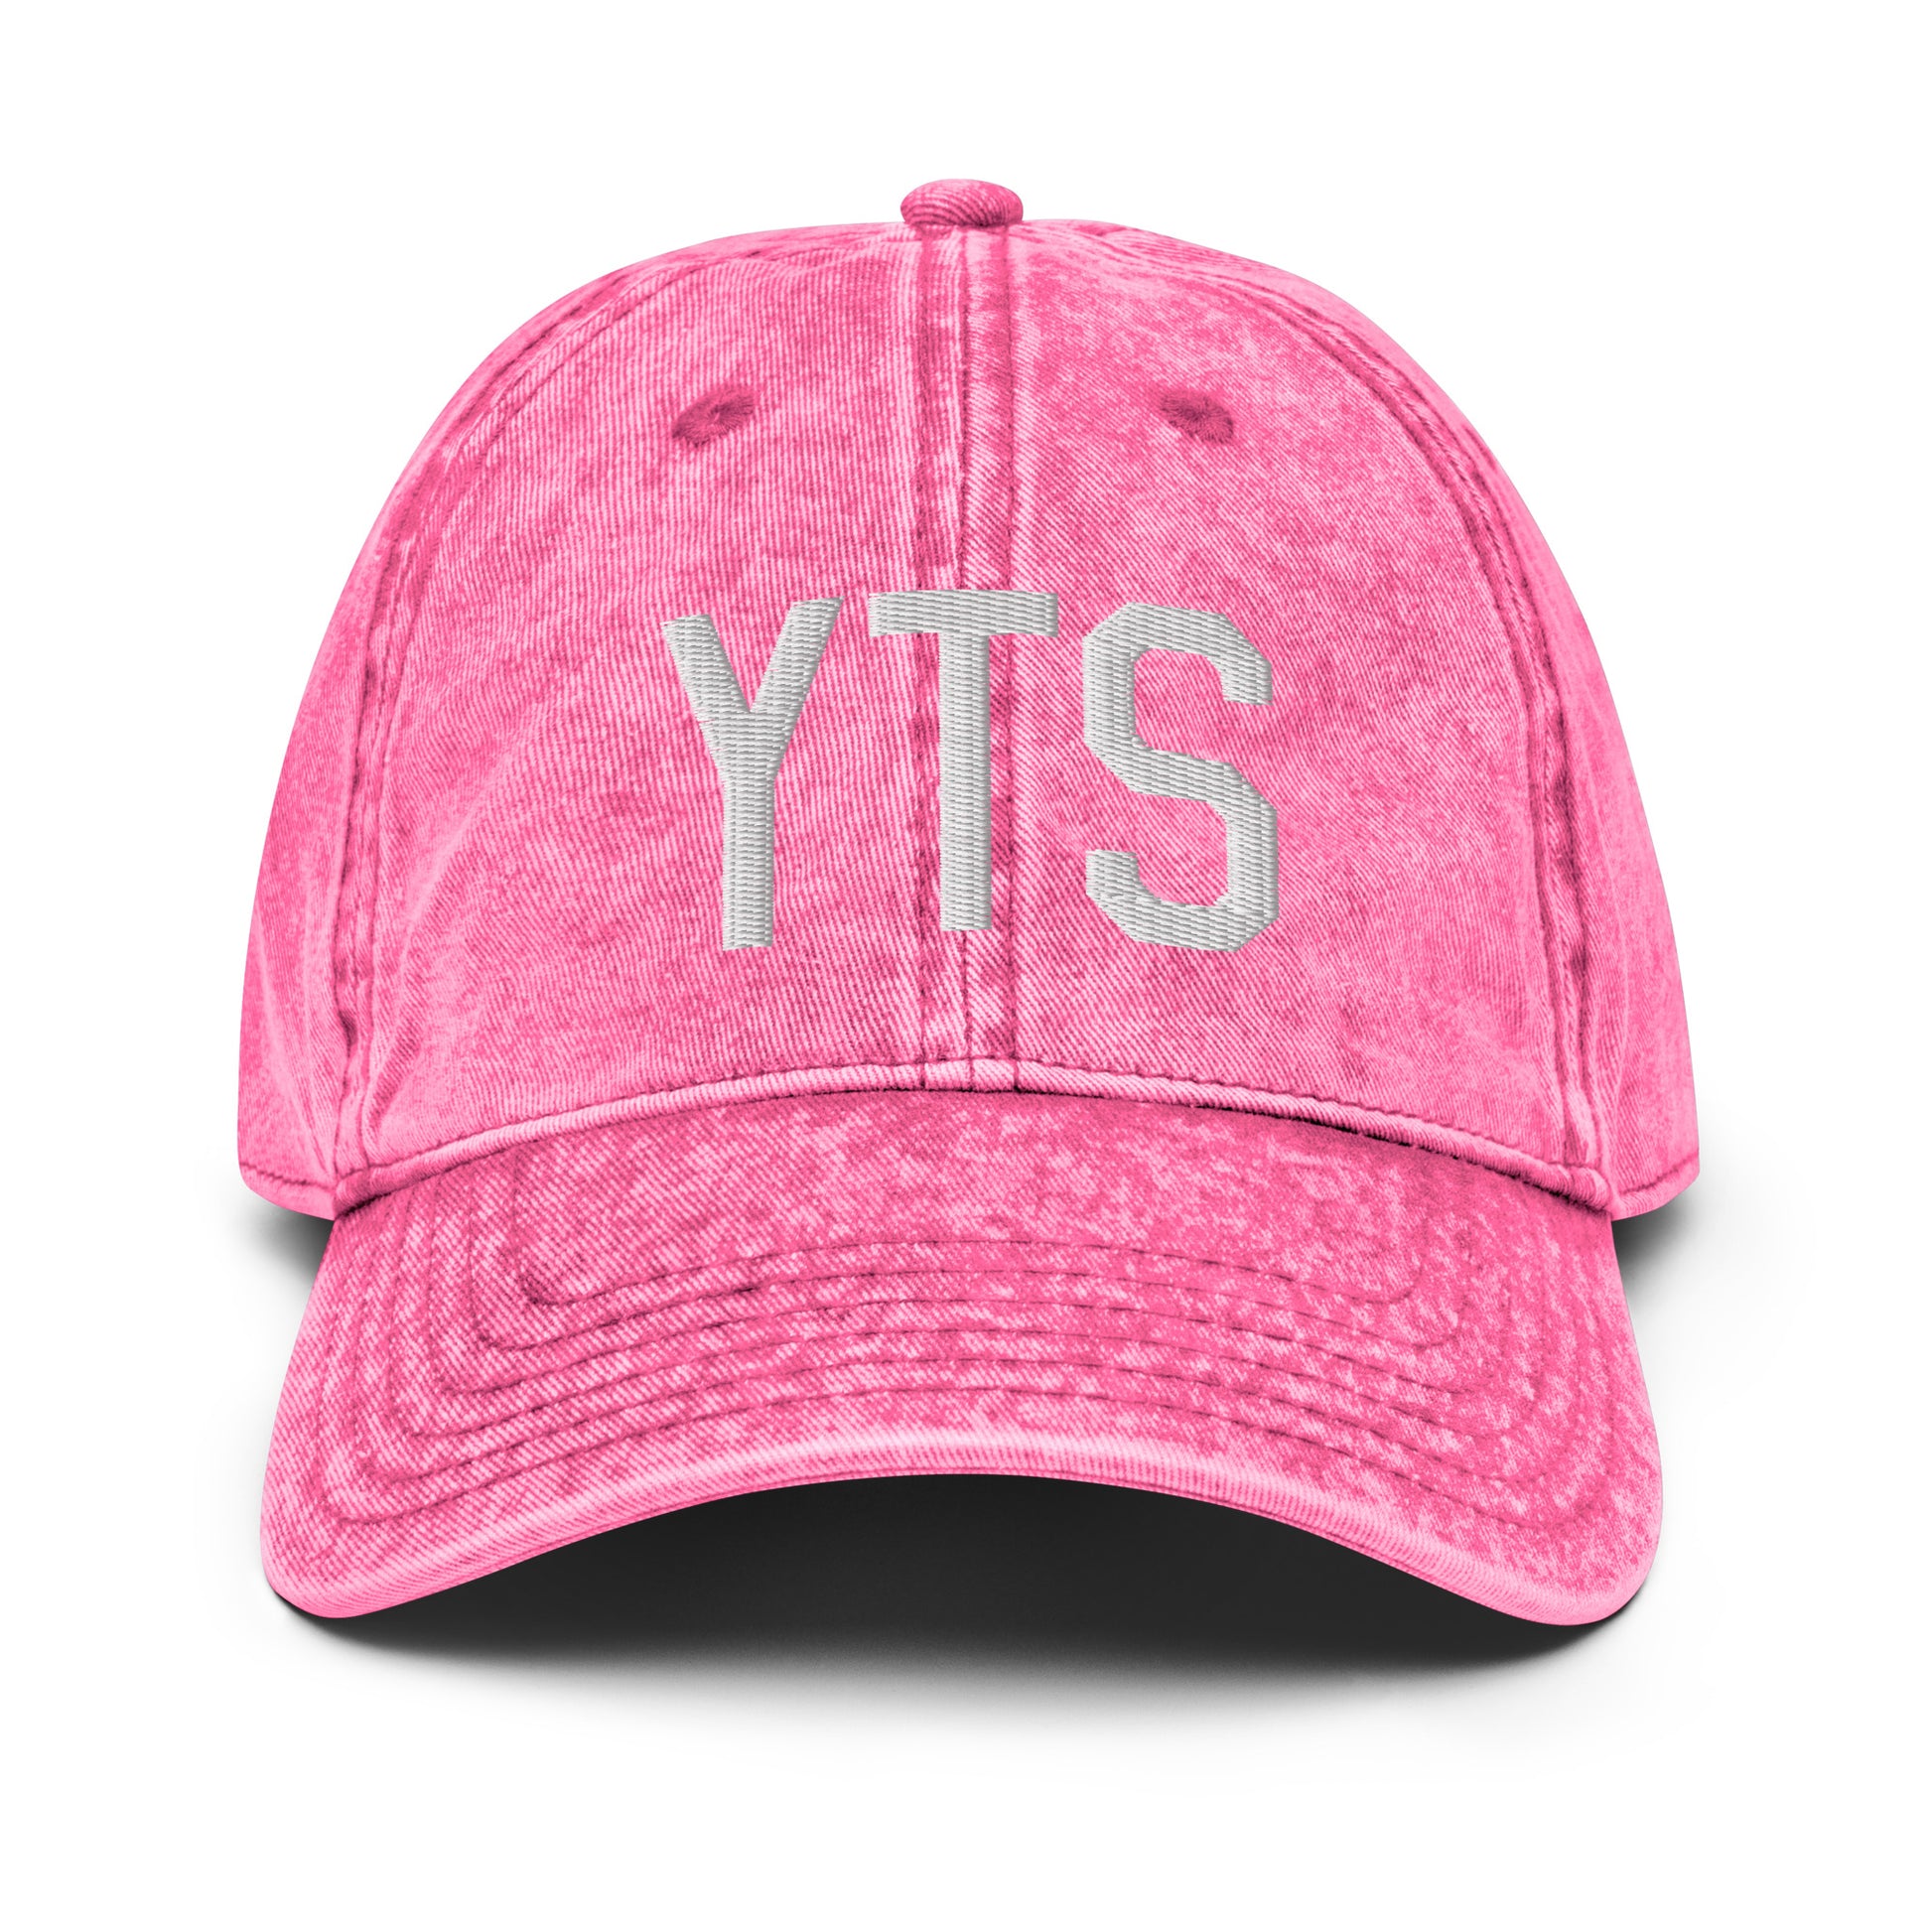 Airport Code Twill Cap - White • YTS Timmins • YHM Designs - Image 25